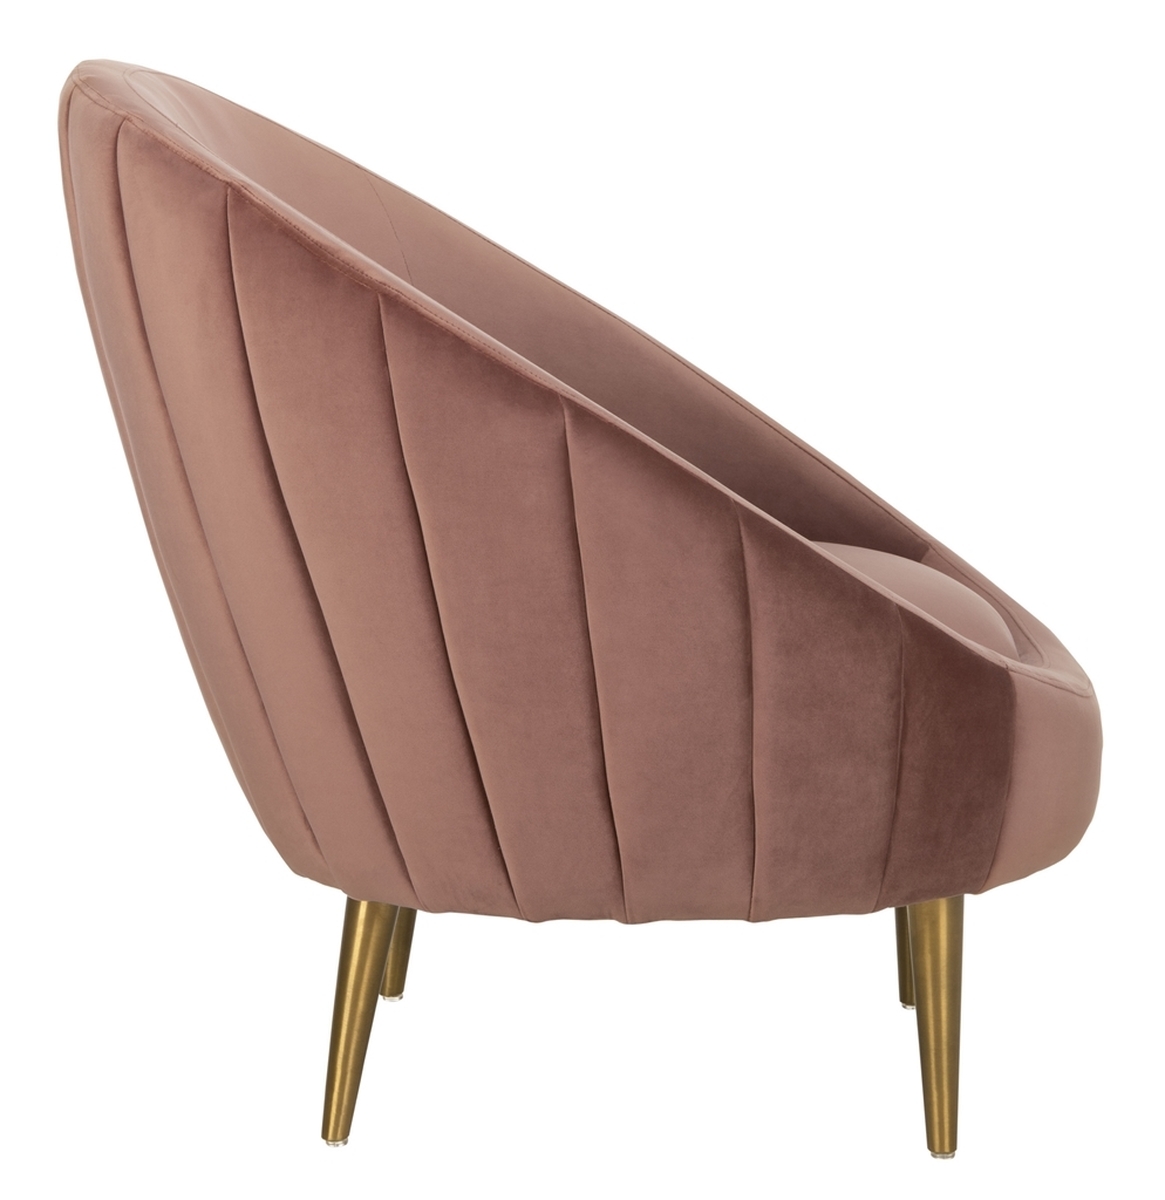 Razia Channel Tufted Tub Chair - Dusty Rose - Arlo Home - Image 3